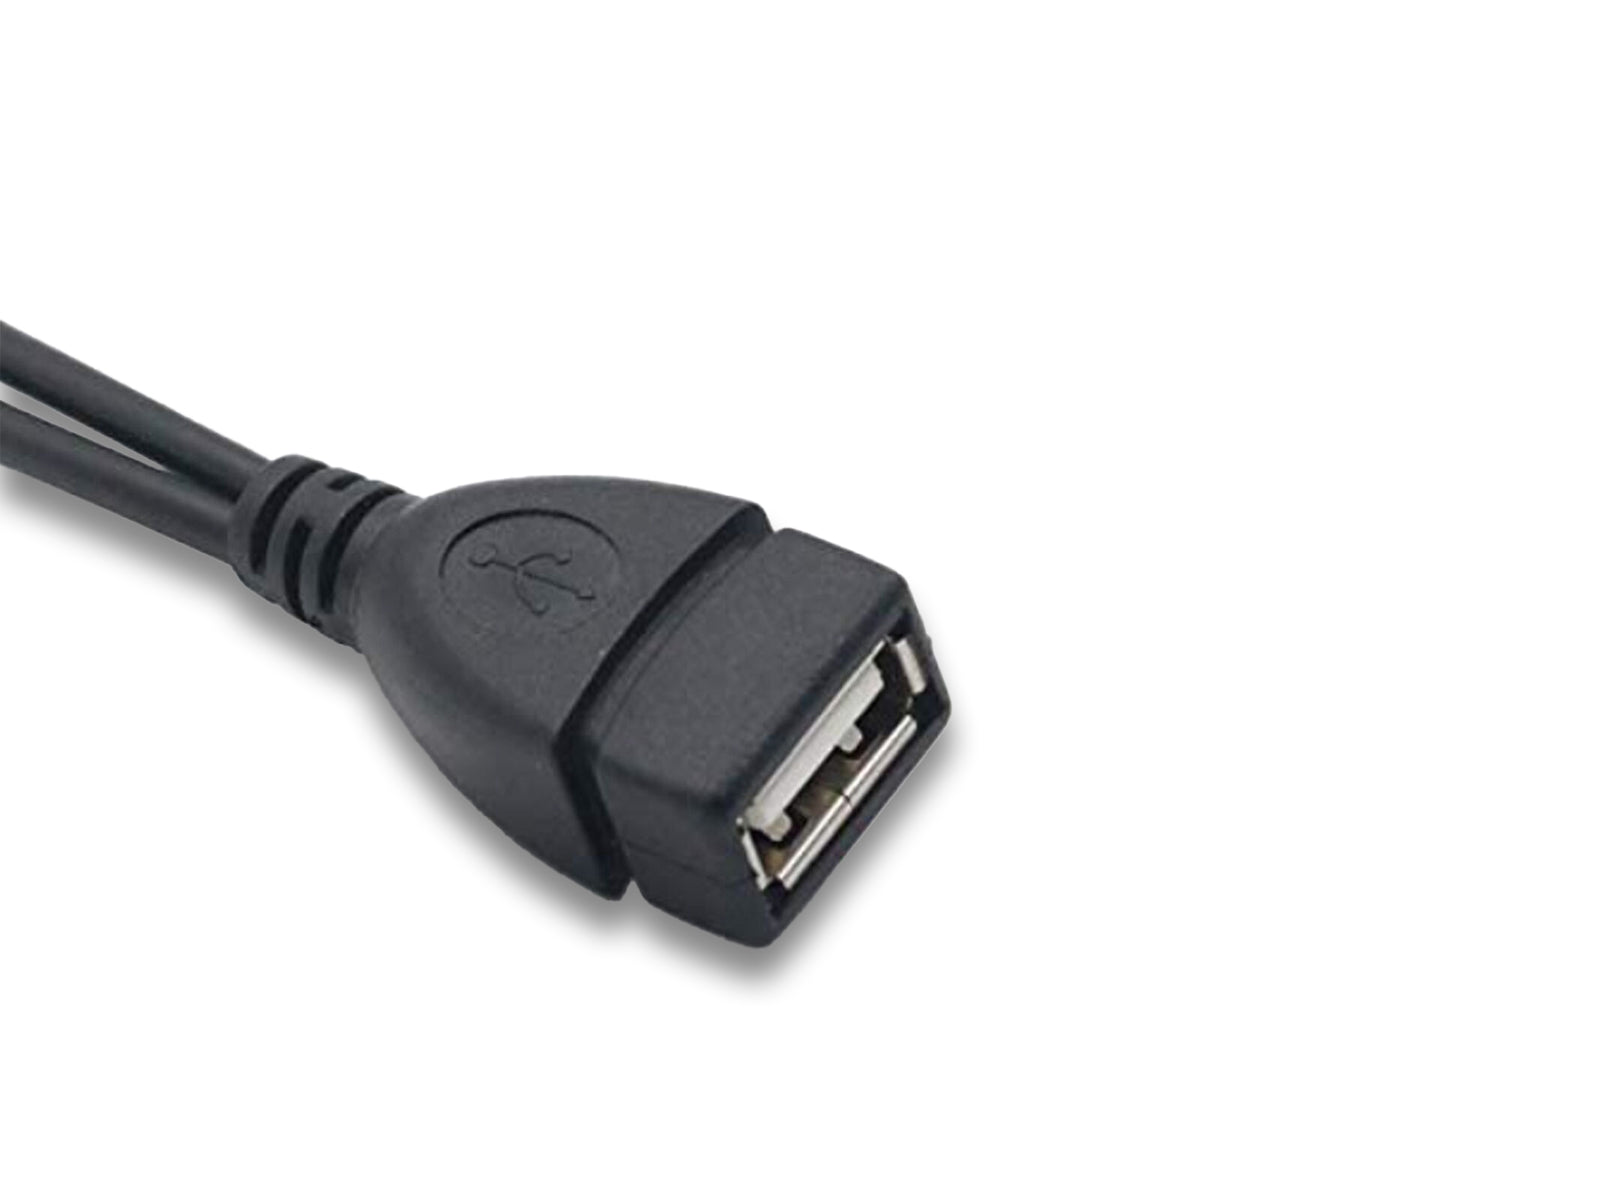 Image shows connector view of otg cable on white backgroundUSB to Micro USB OTG Cable (Power & Data) 